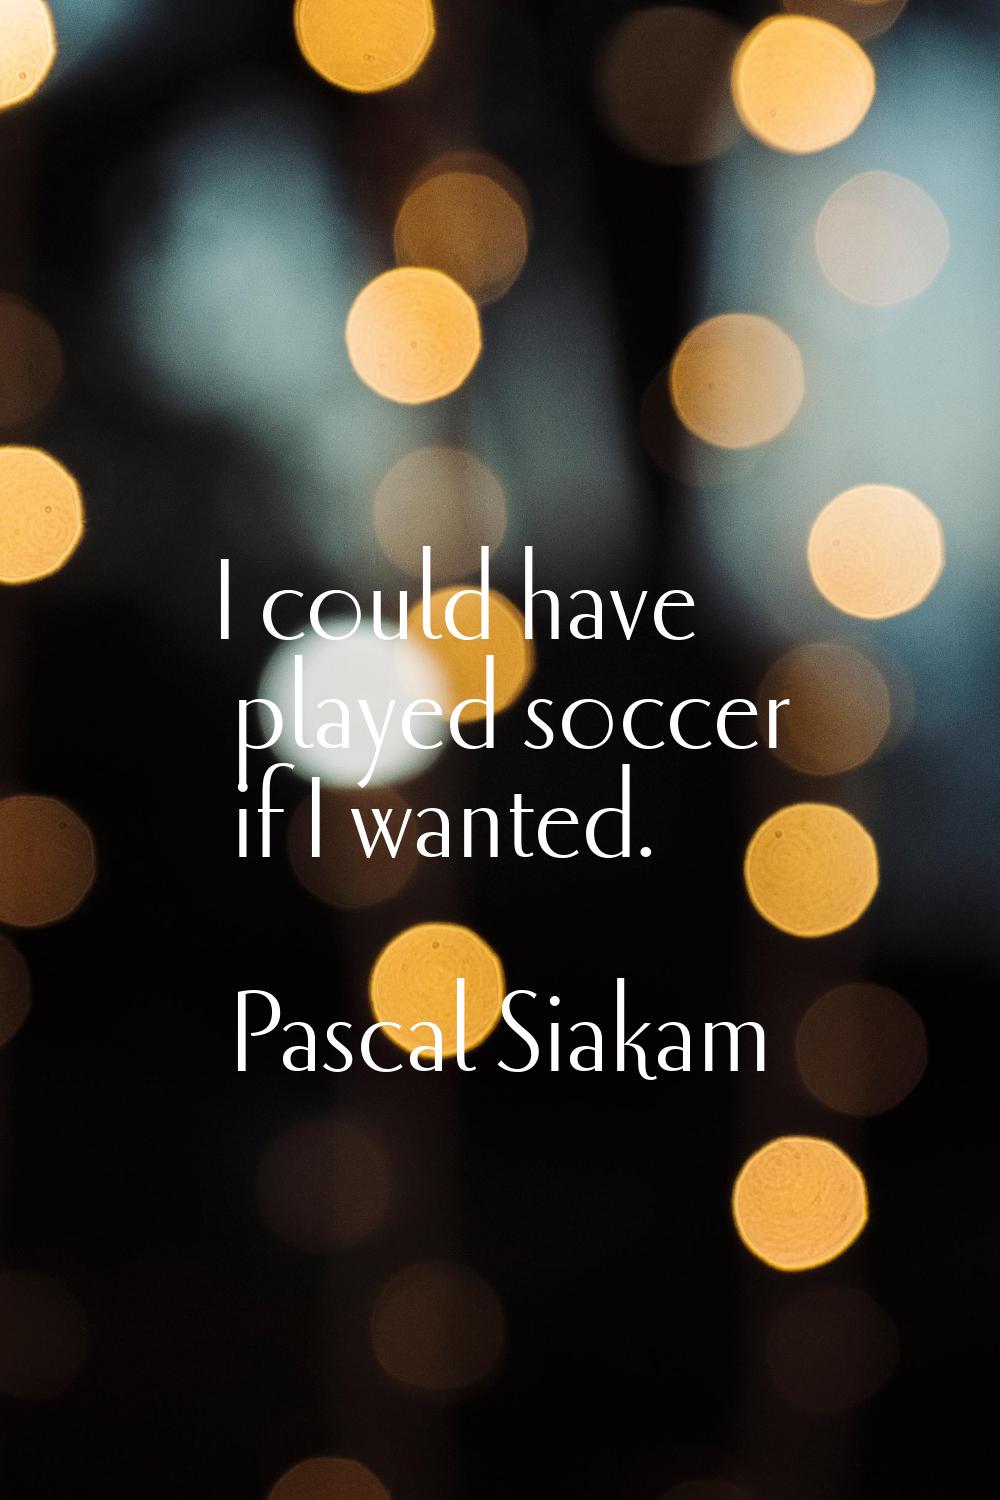 I could have played soccer if I wanted.